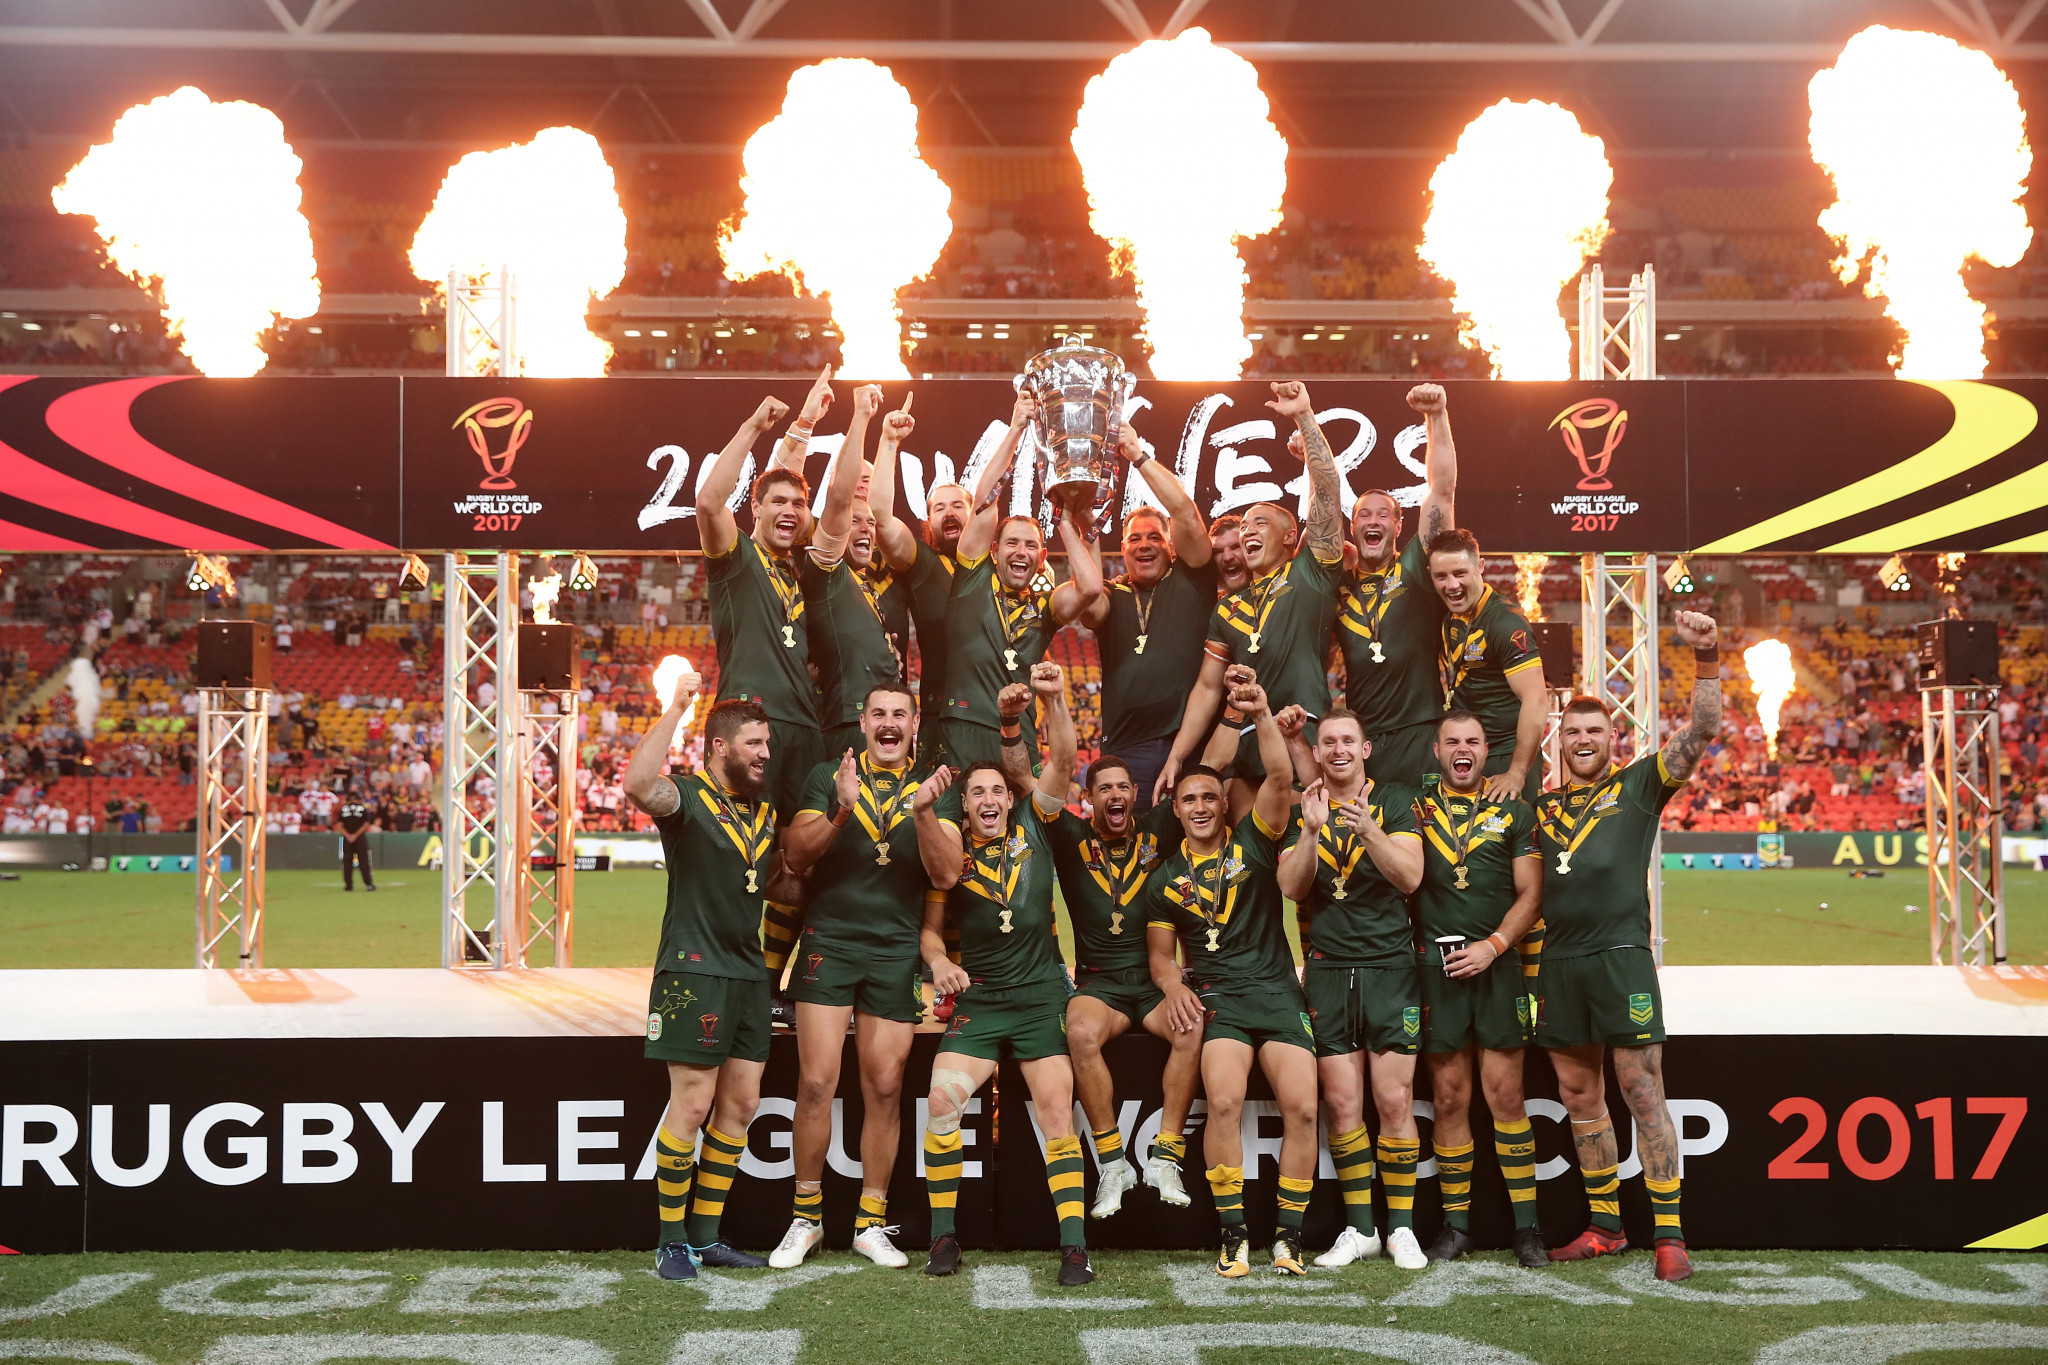 Australia, holders of the men's and women's titles, are unlikely to defend them if the tournament goes ahead on its scheduled dates this year ©Getty Images